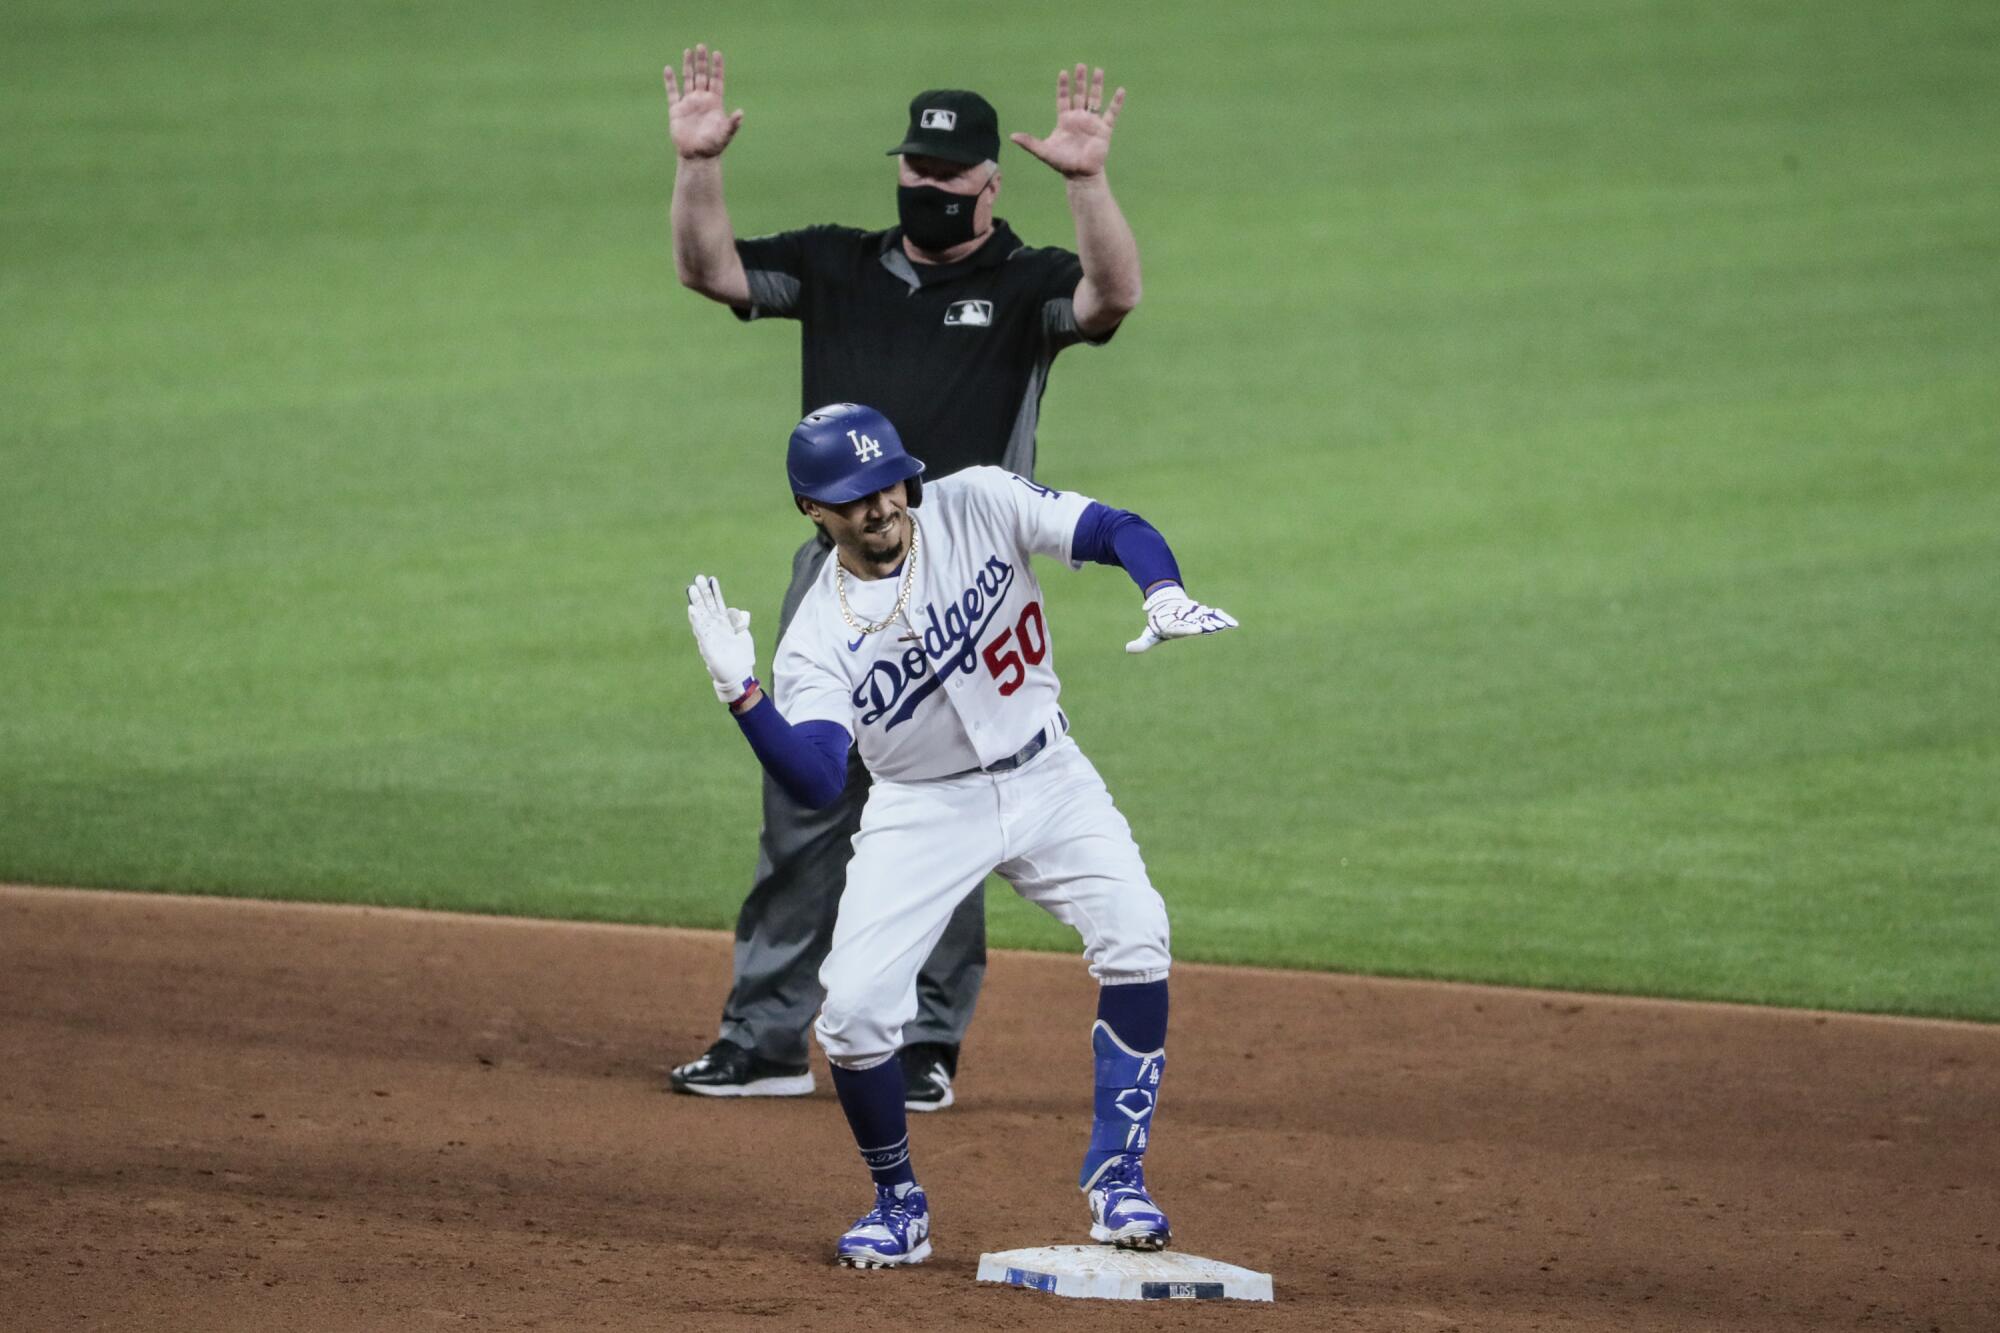 Dodgers right fielder Mookie Betts makes a chopping gesture after doubling in the sixth inning against the Padres on Tuesday.